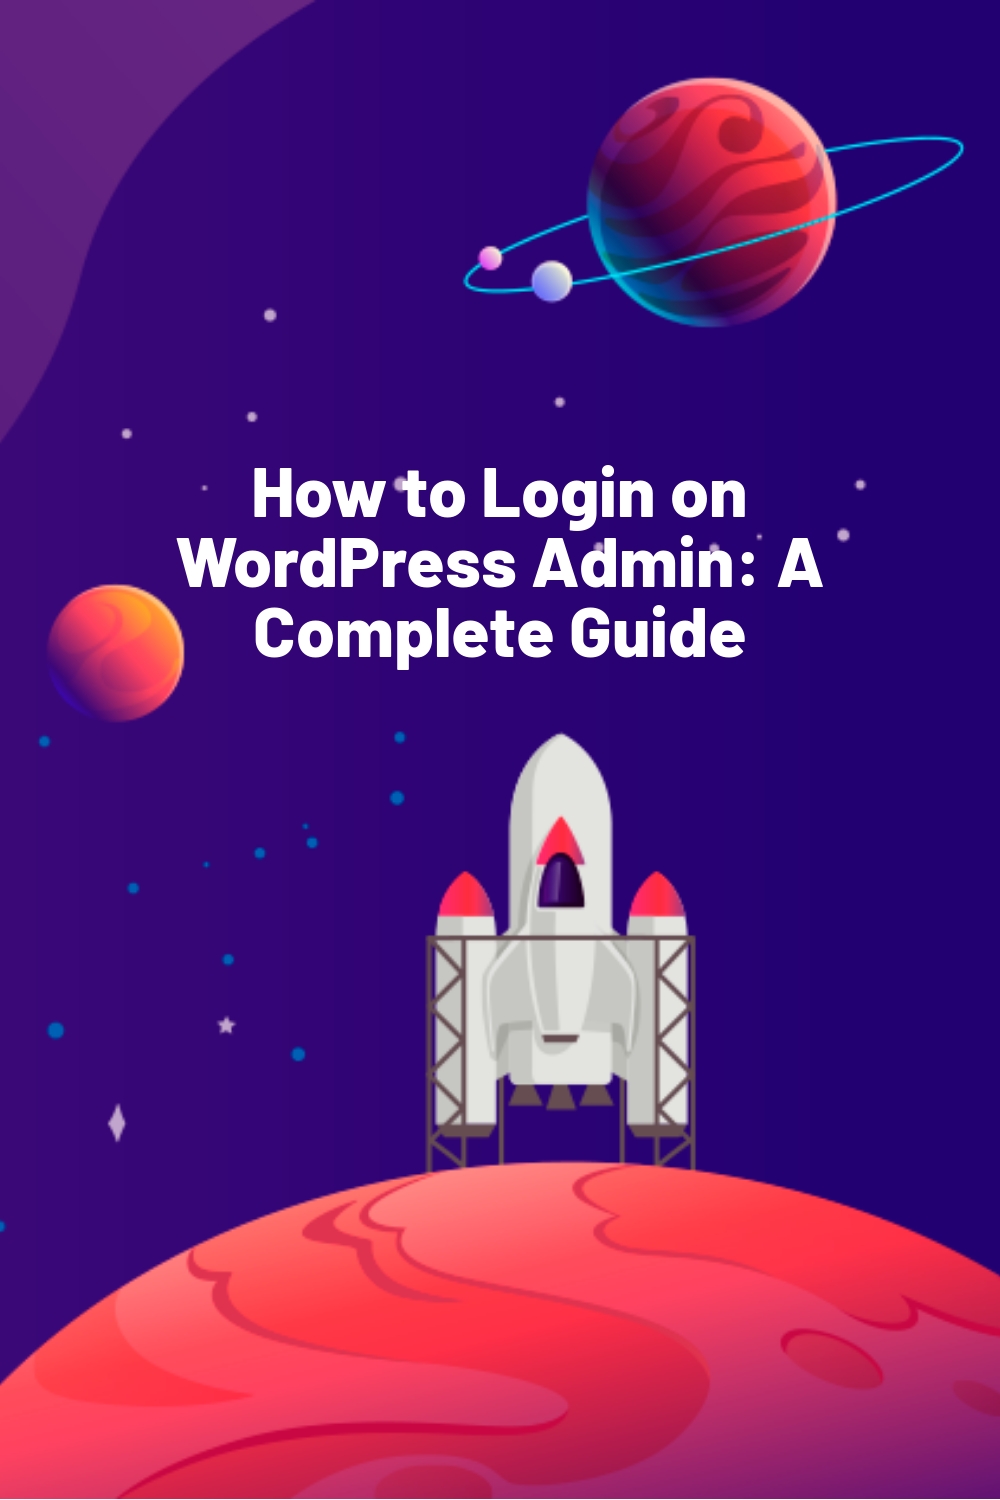 How to Login on WordPress Admin: A Complete Guide